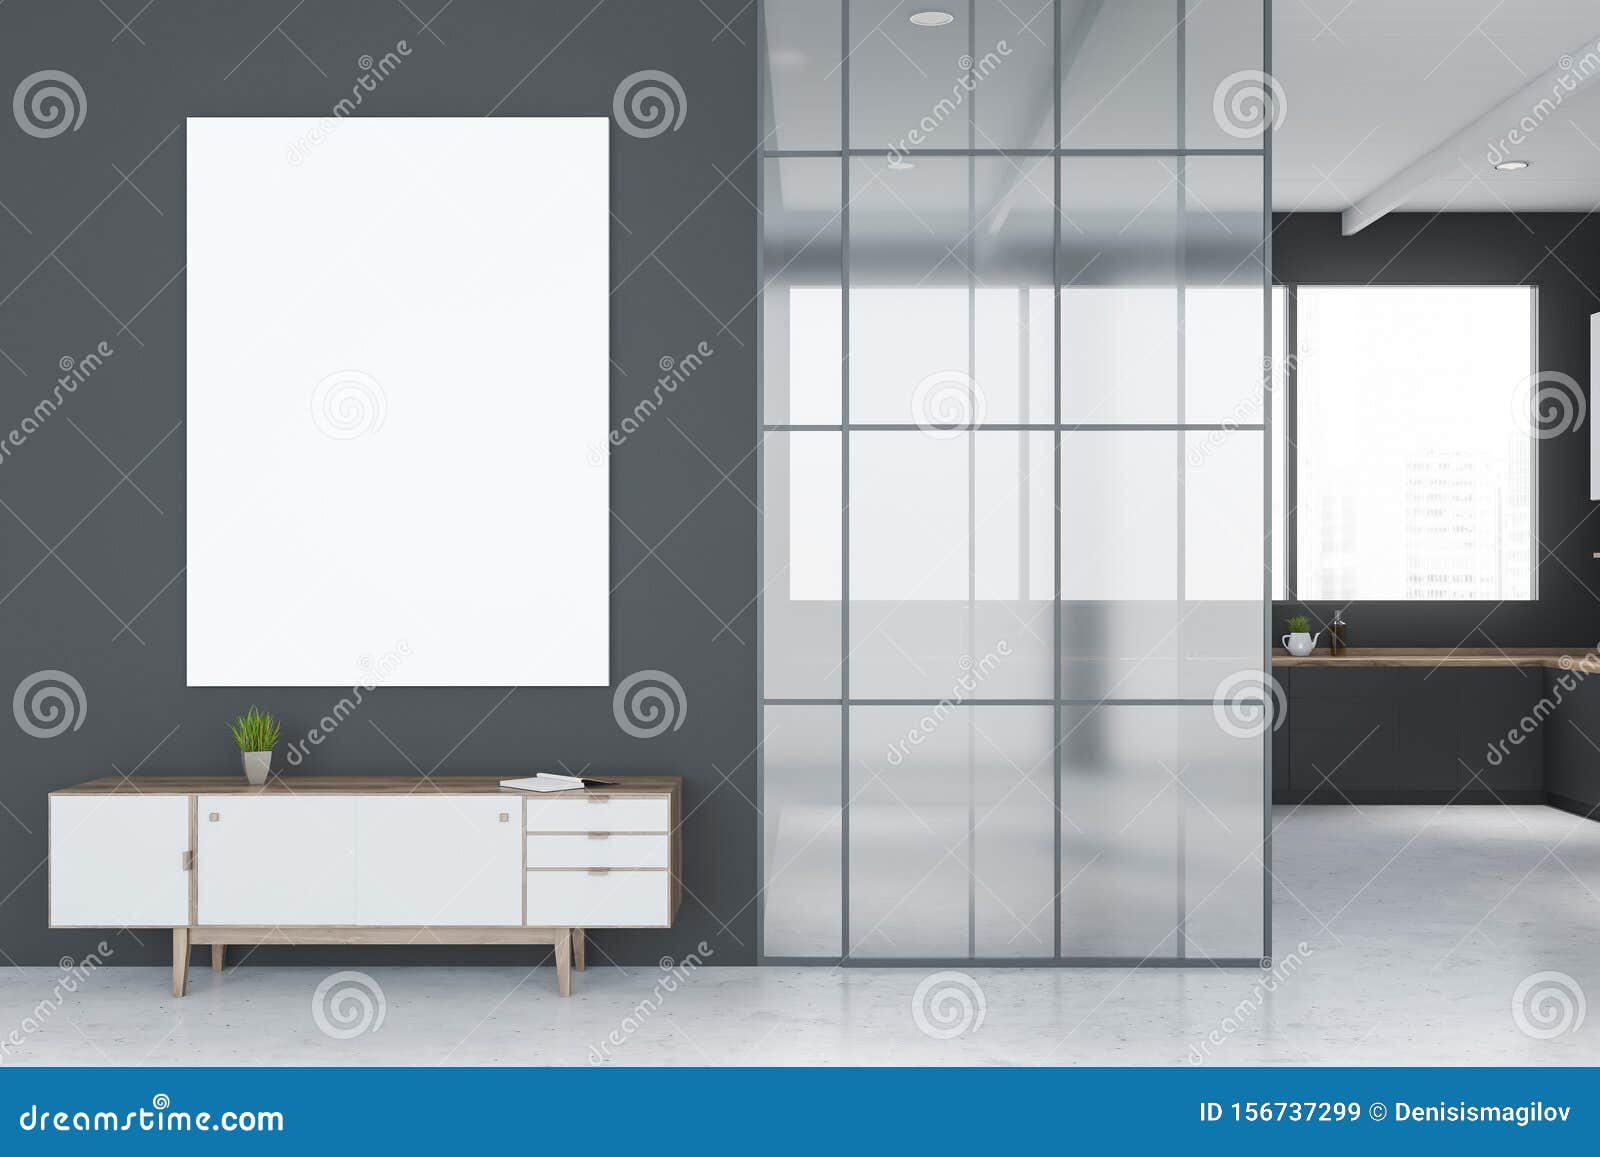 Poster And Cabinet In Gray Living Room And Kitchen Stock